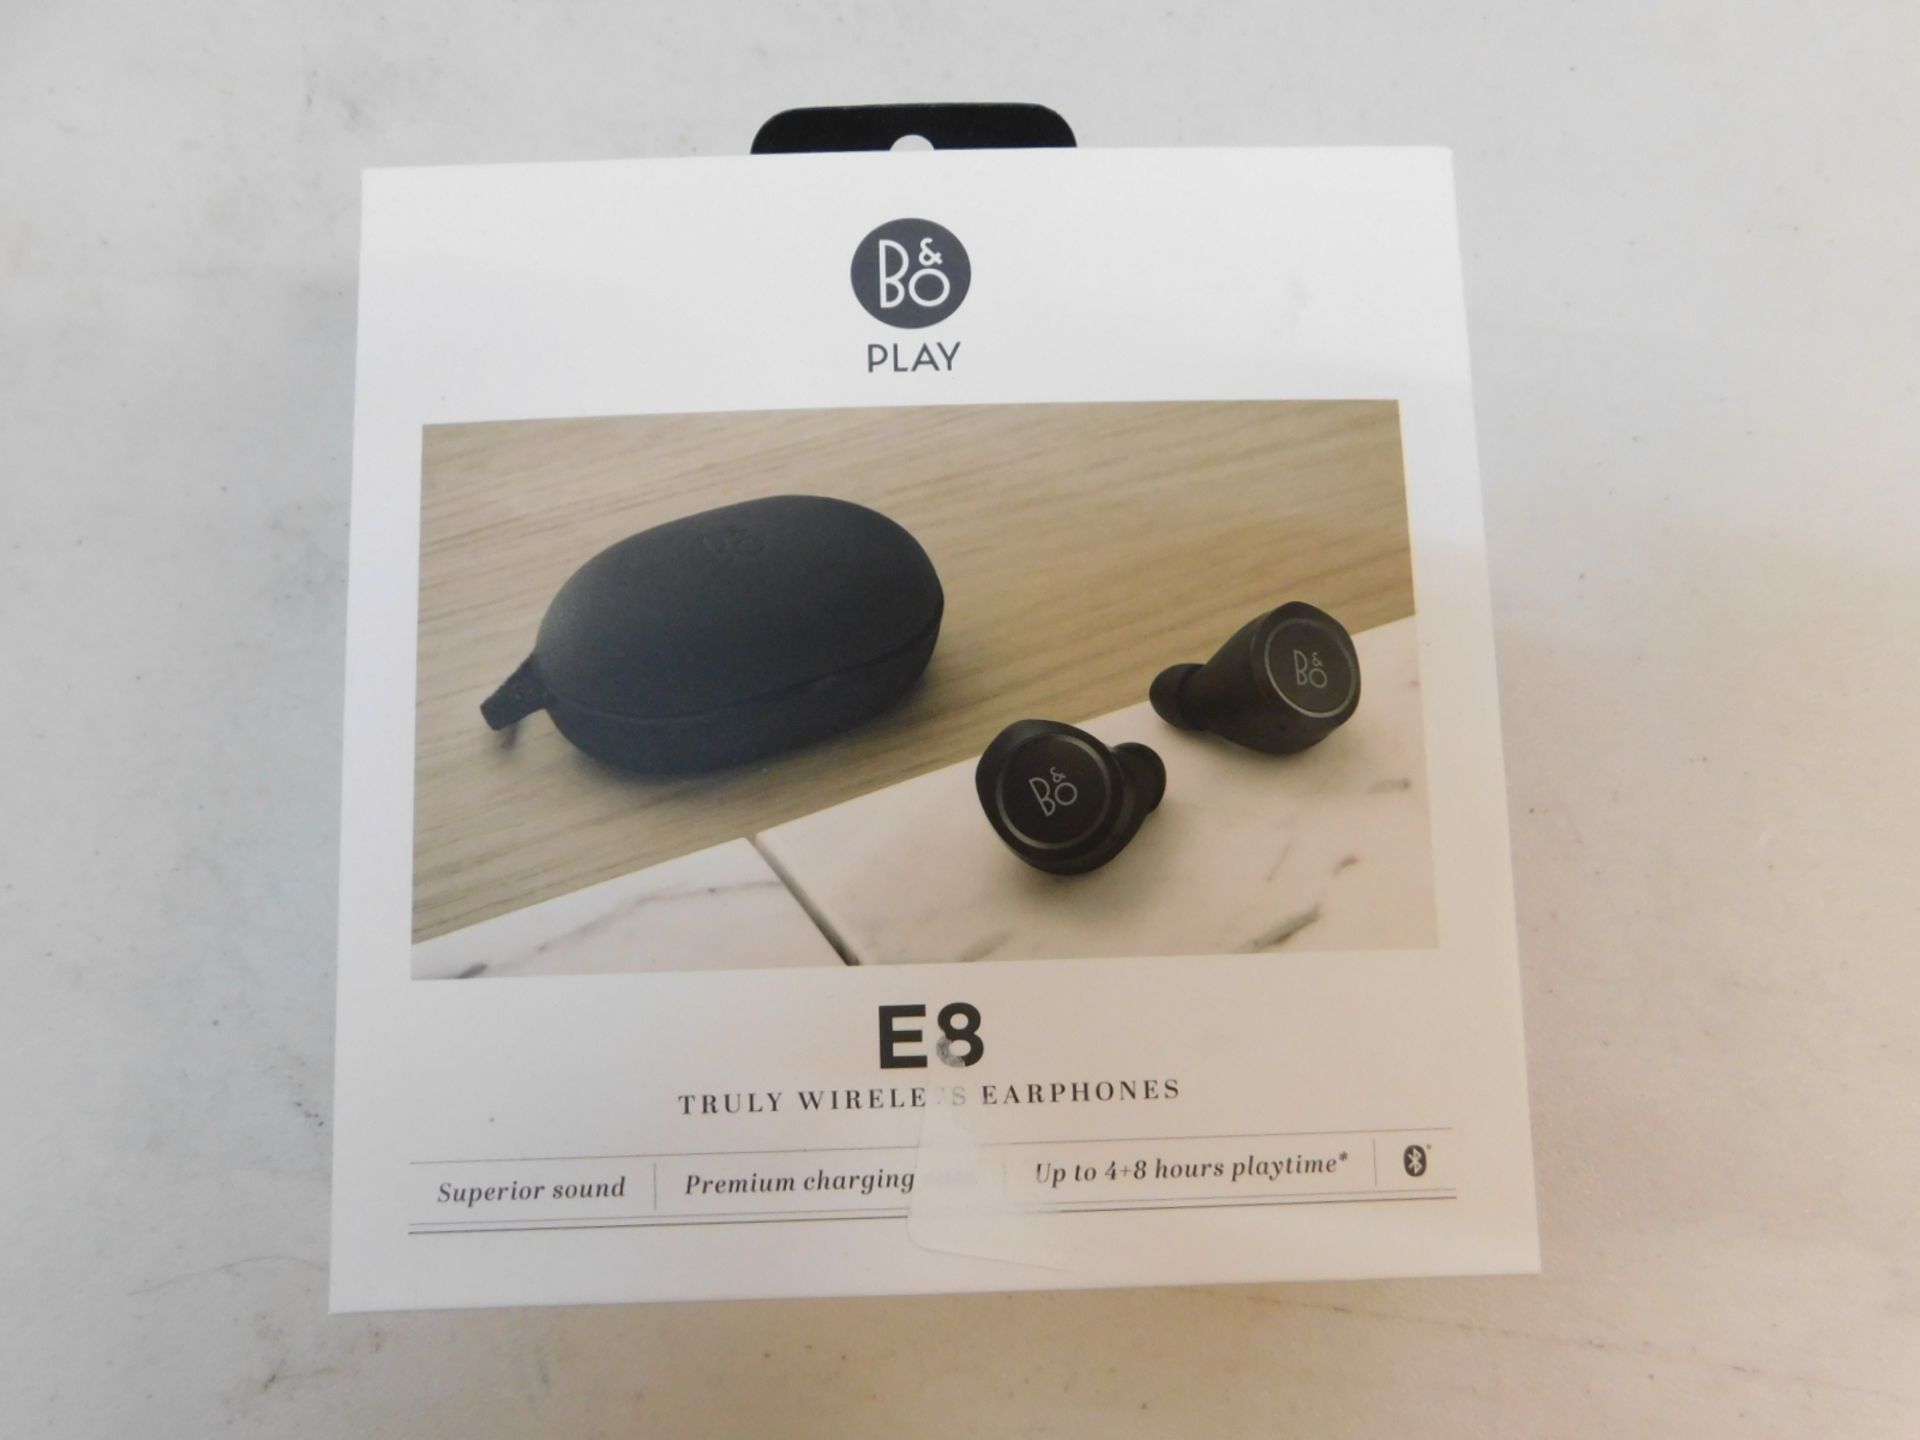 1 BOXED BANG AND OLUFSEN E8 TRUE WIRELESS BLUETOOTH EARPHONES RRP £299